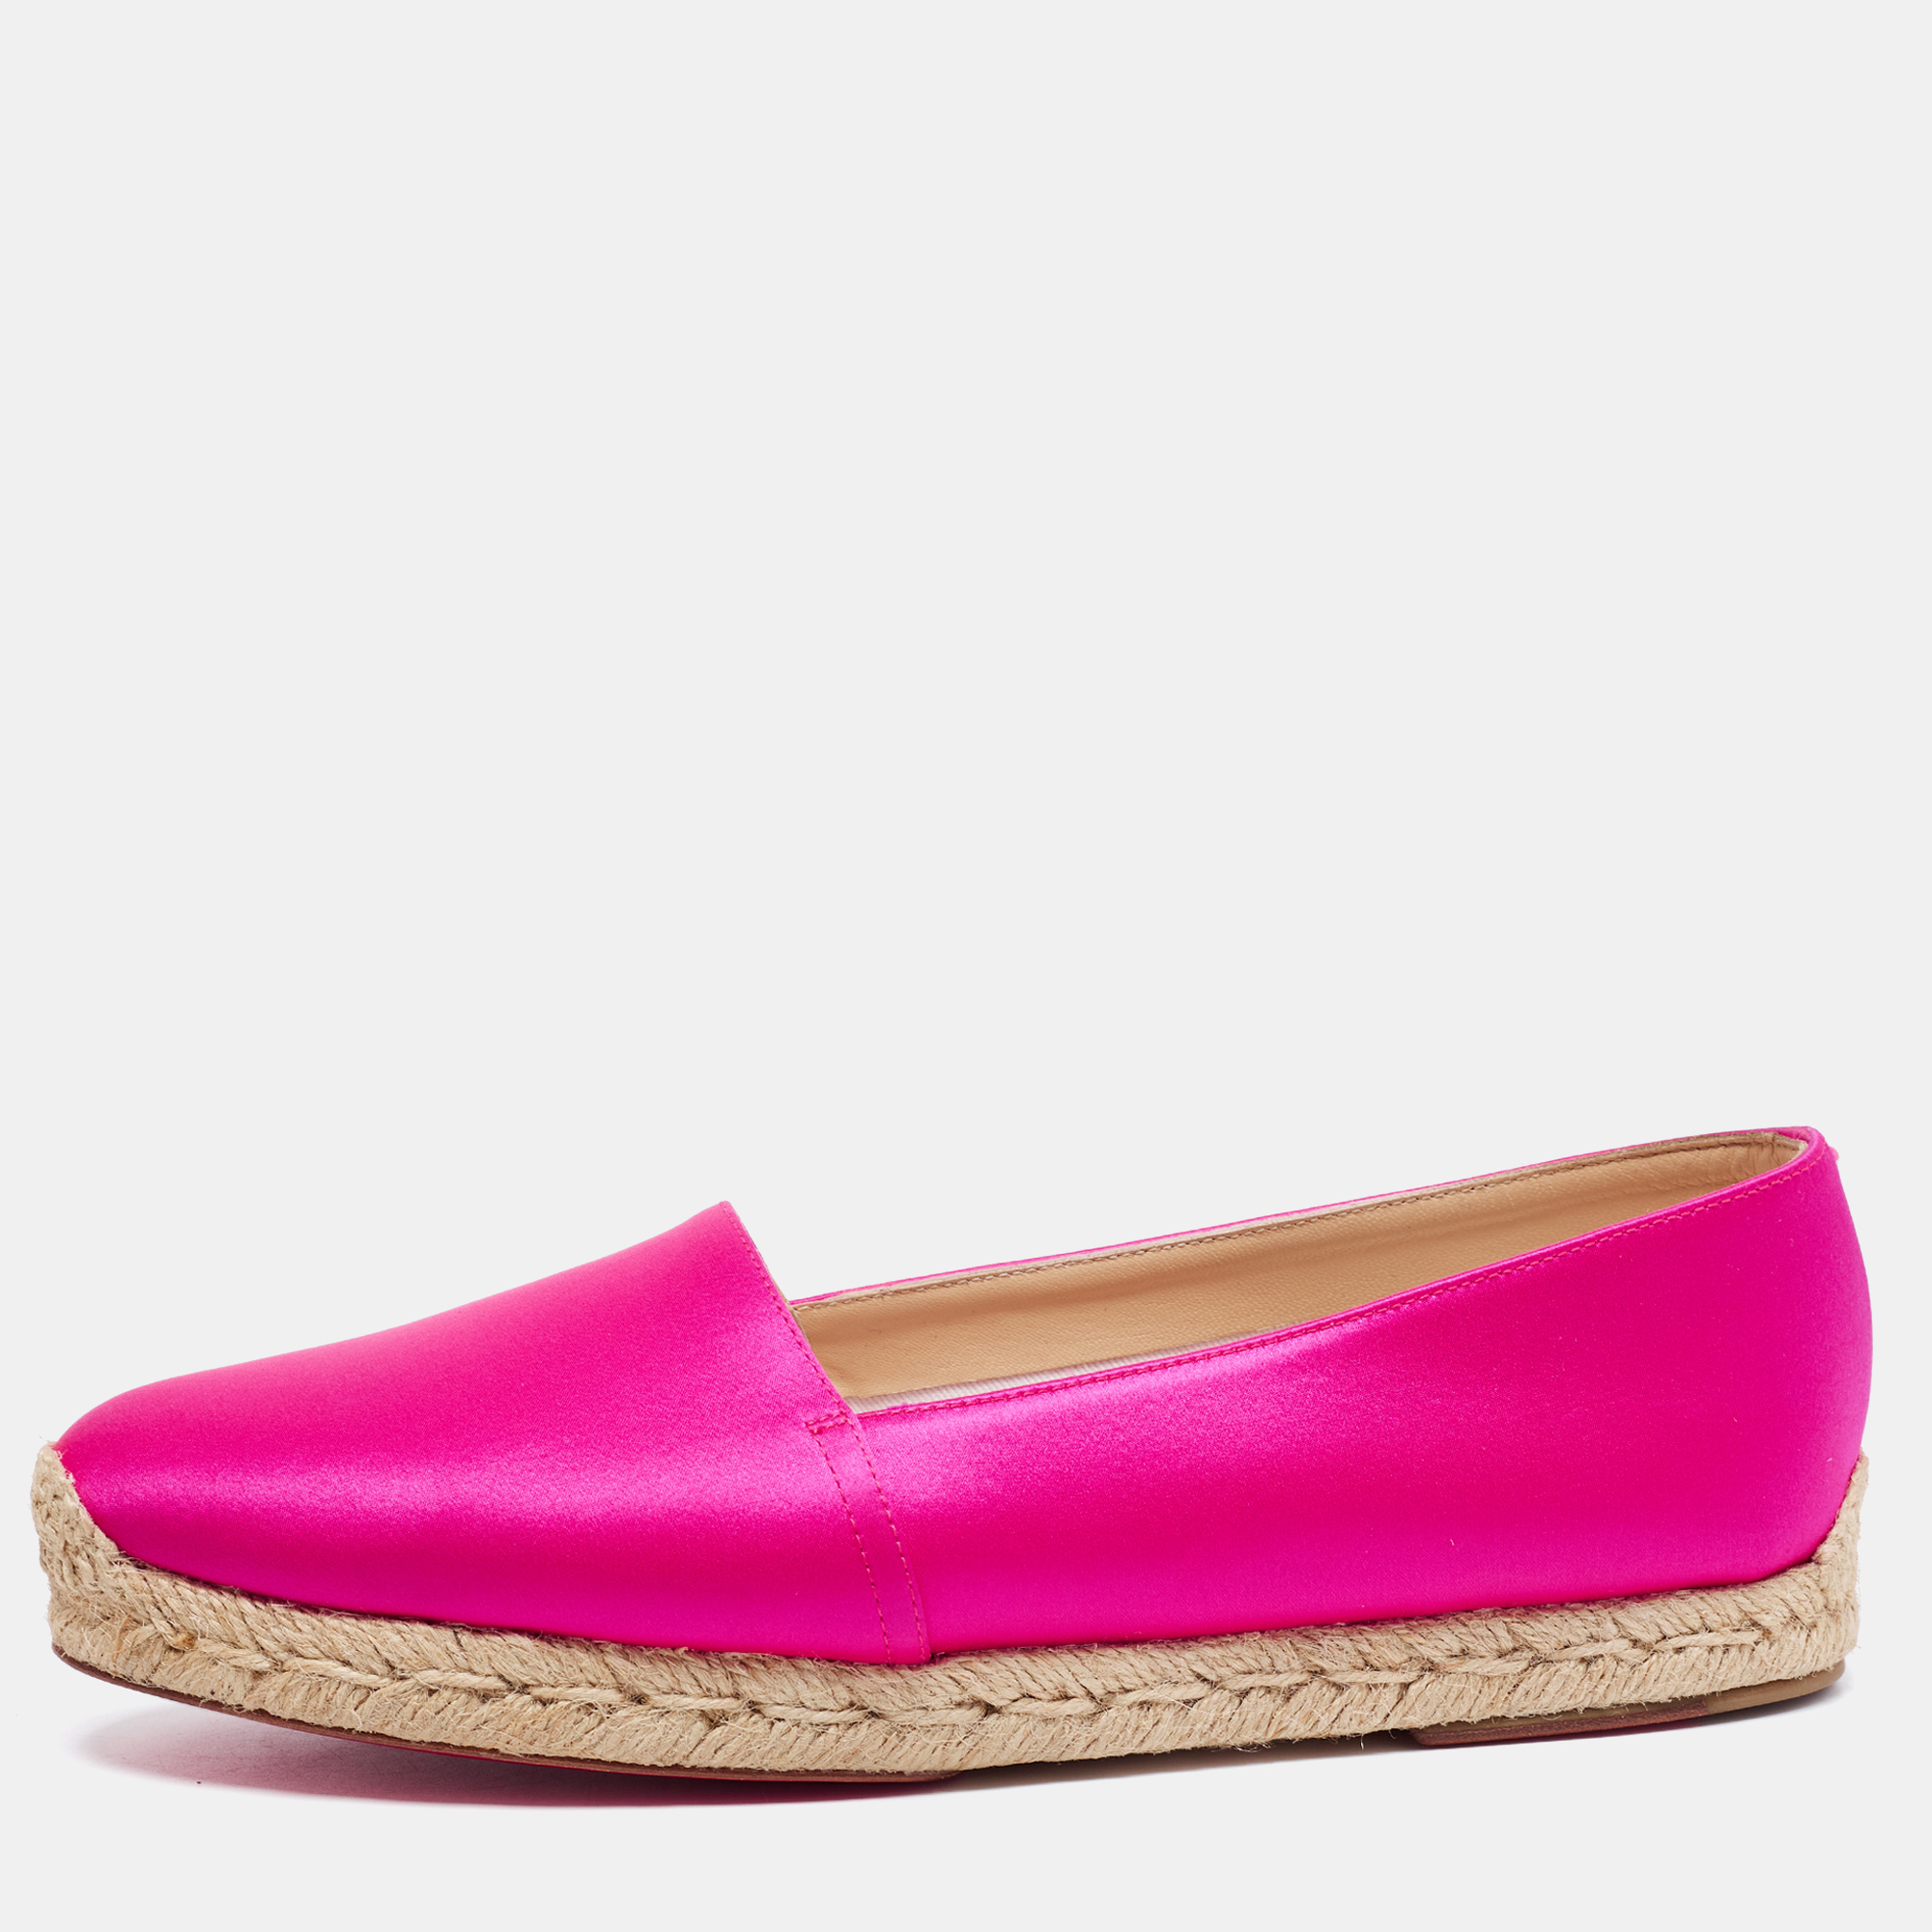 CHRISTIAN LOUBOUTIN Pre-owned Pink Satin Espachica Espadrilles Flats Size 39